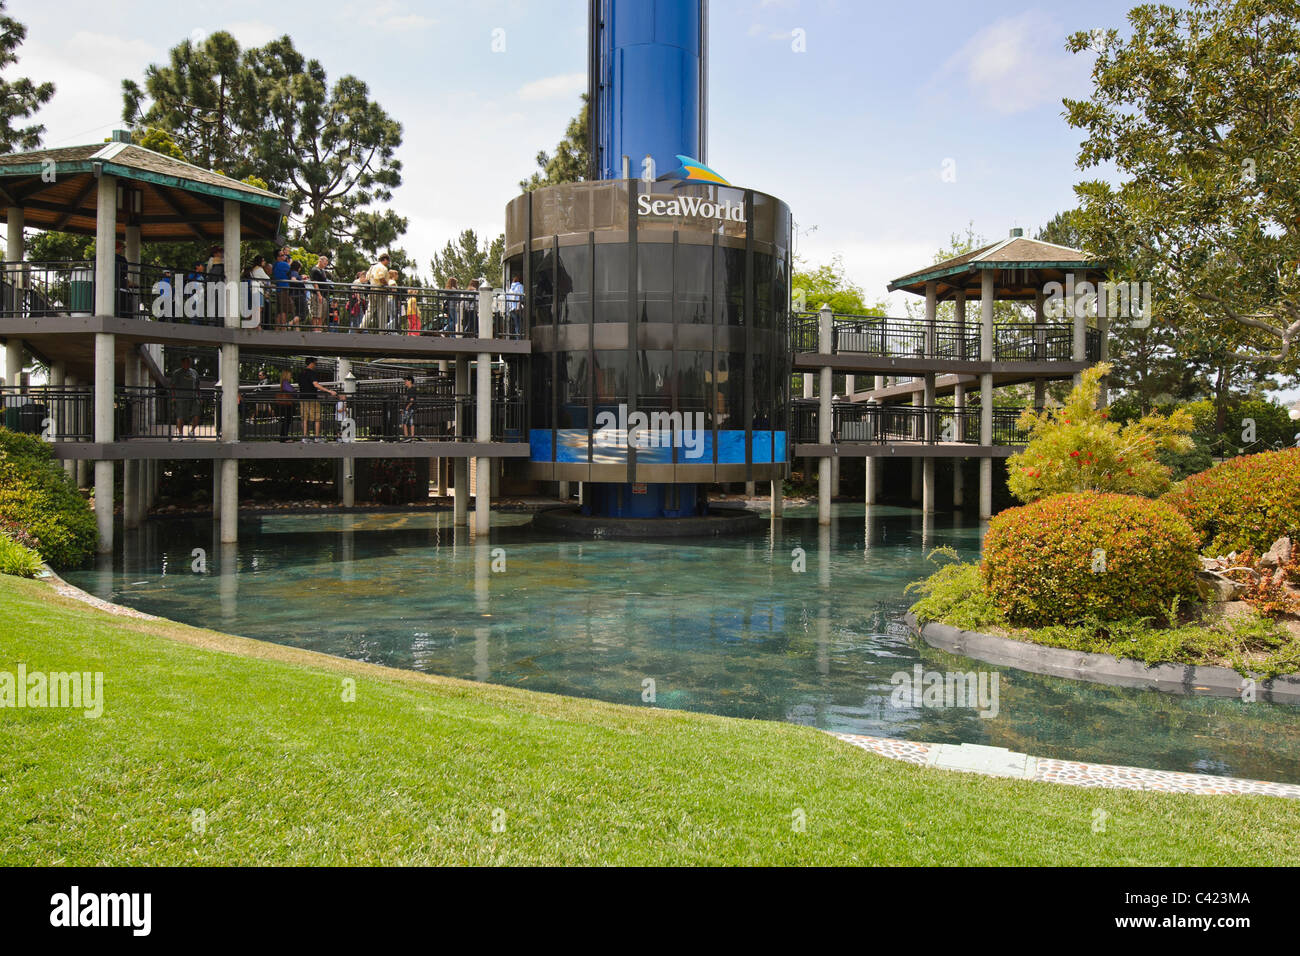 SeaWorld San Diego Sky Tower. Banque D'Images